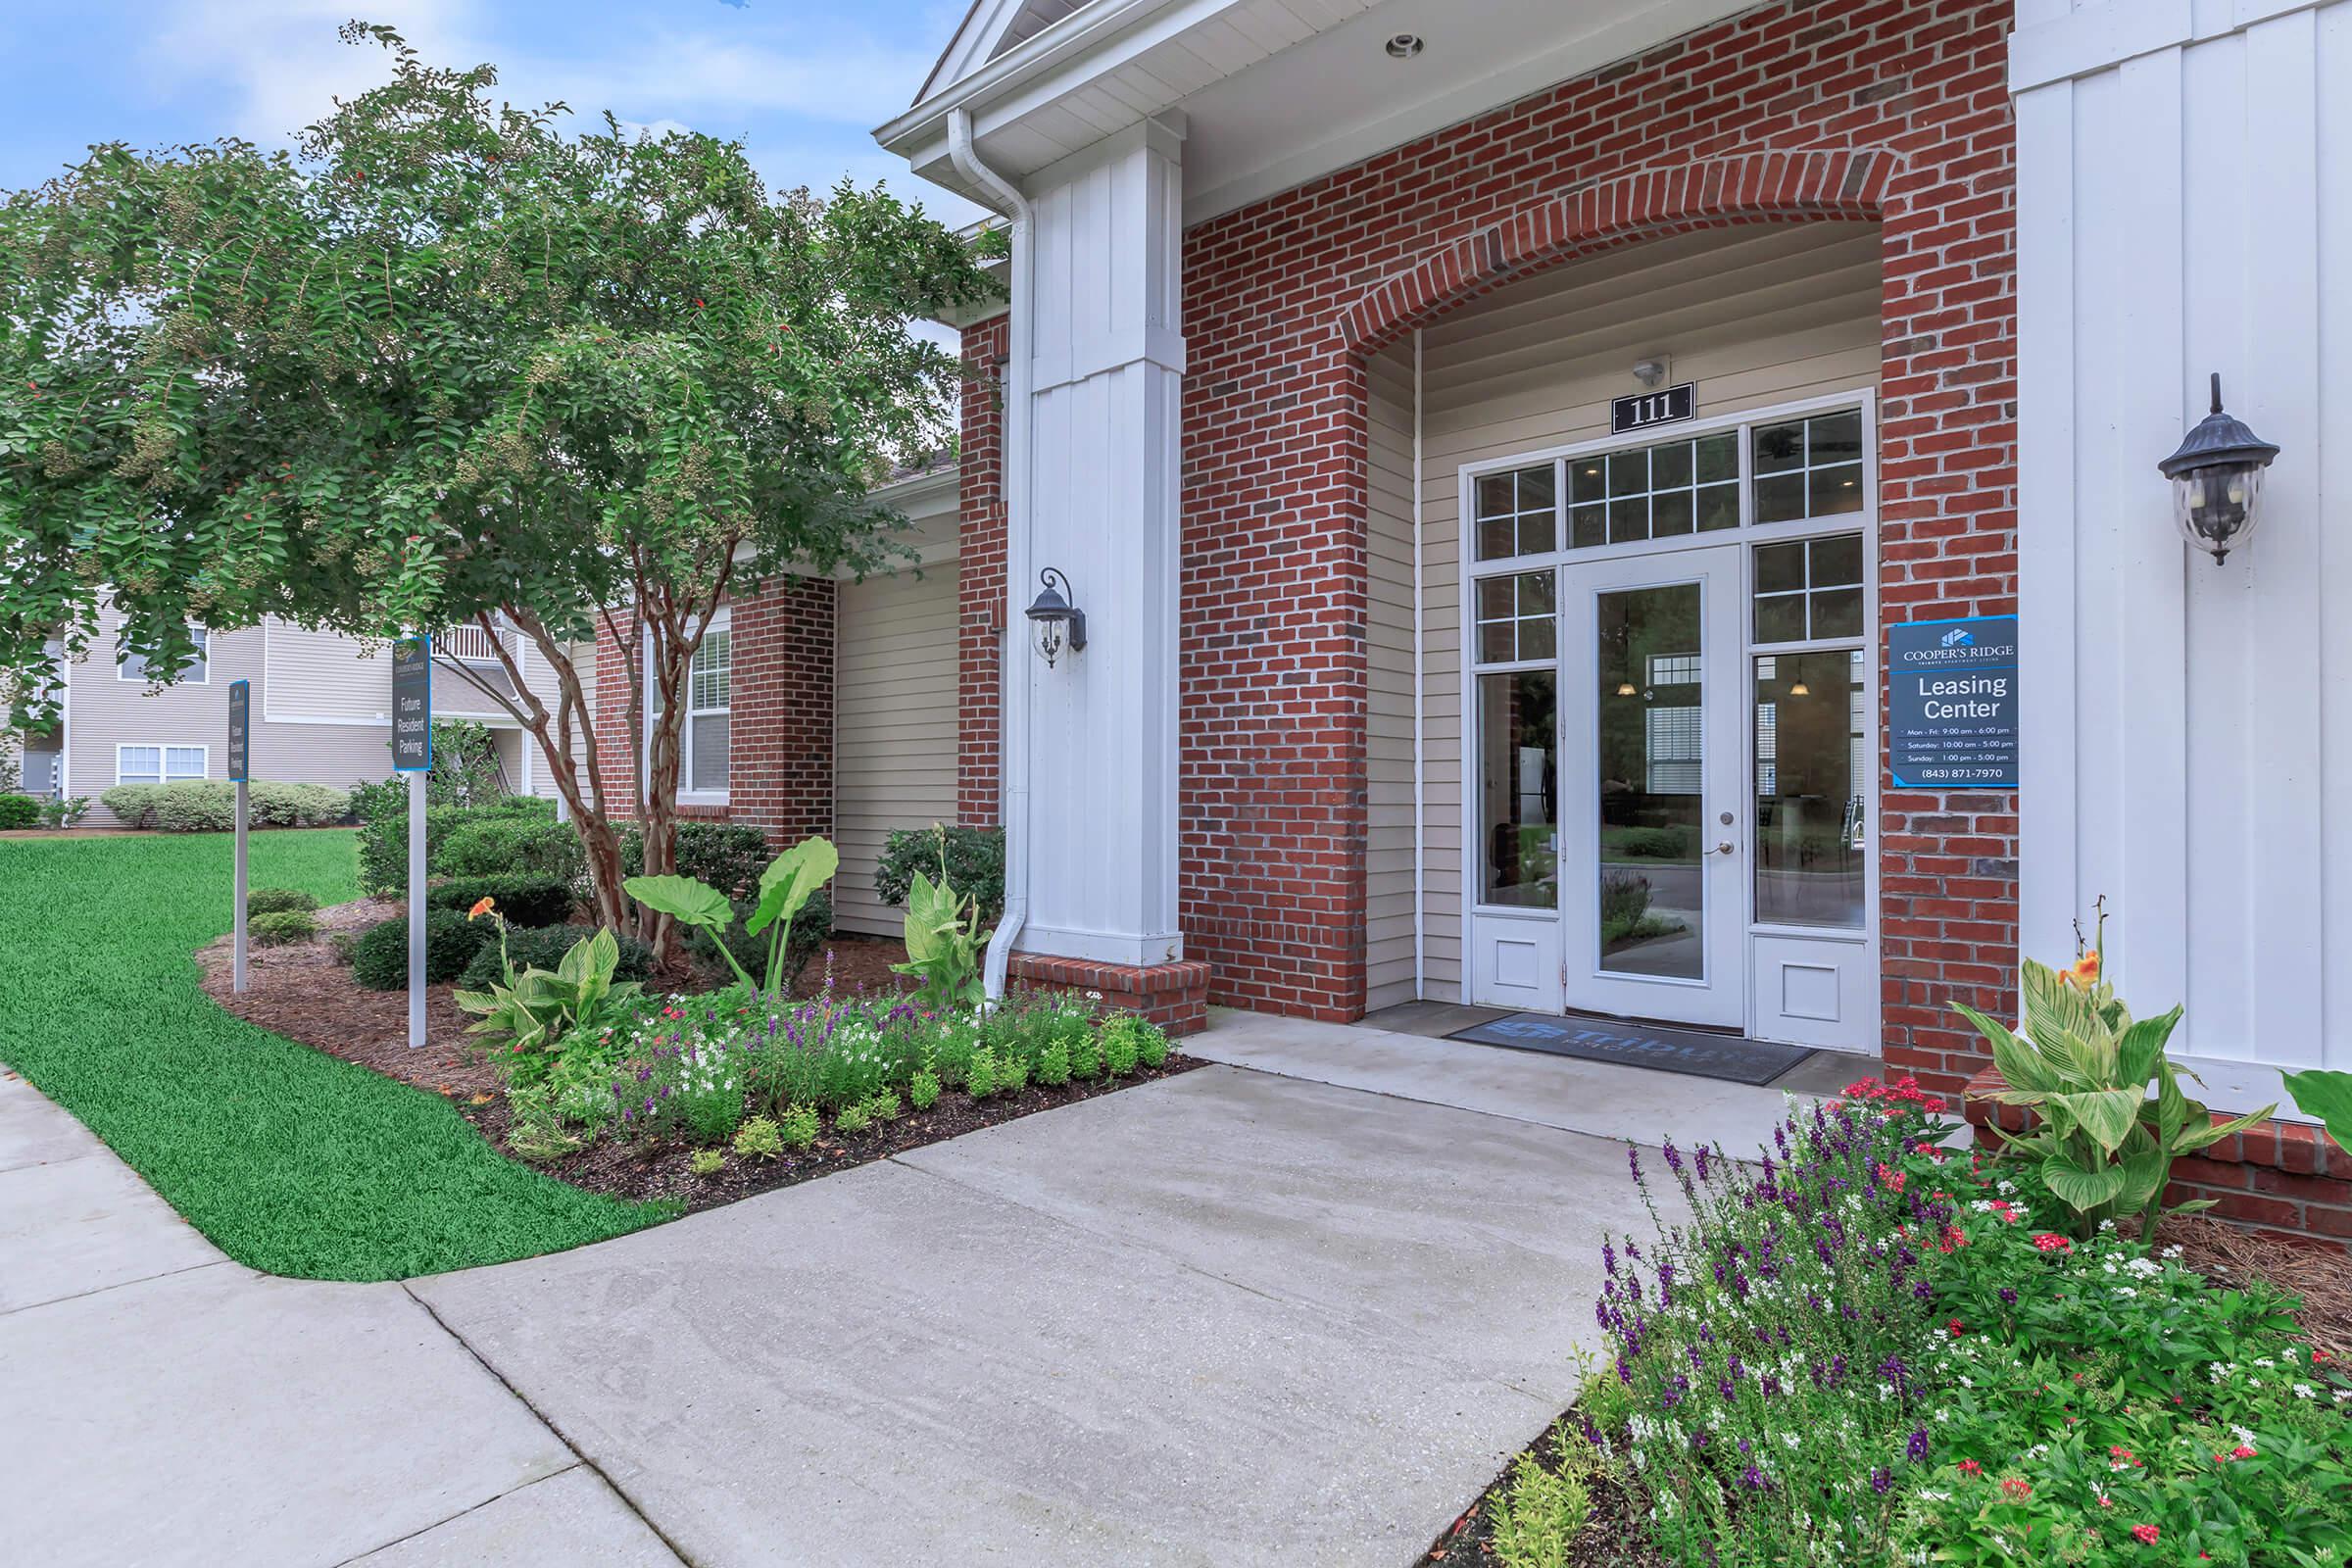 Visit Our Leasing Office Here At Cooper's Ridge in Ladson, South Carolina